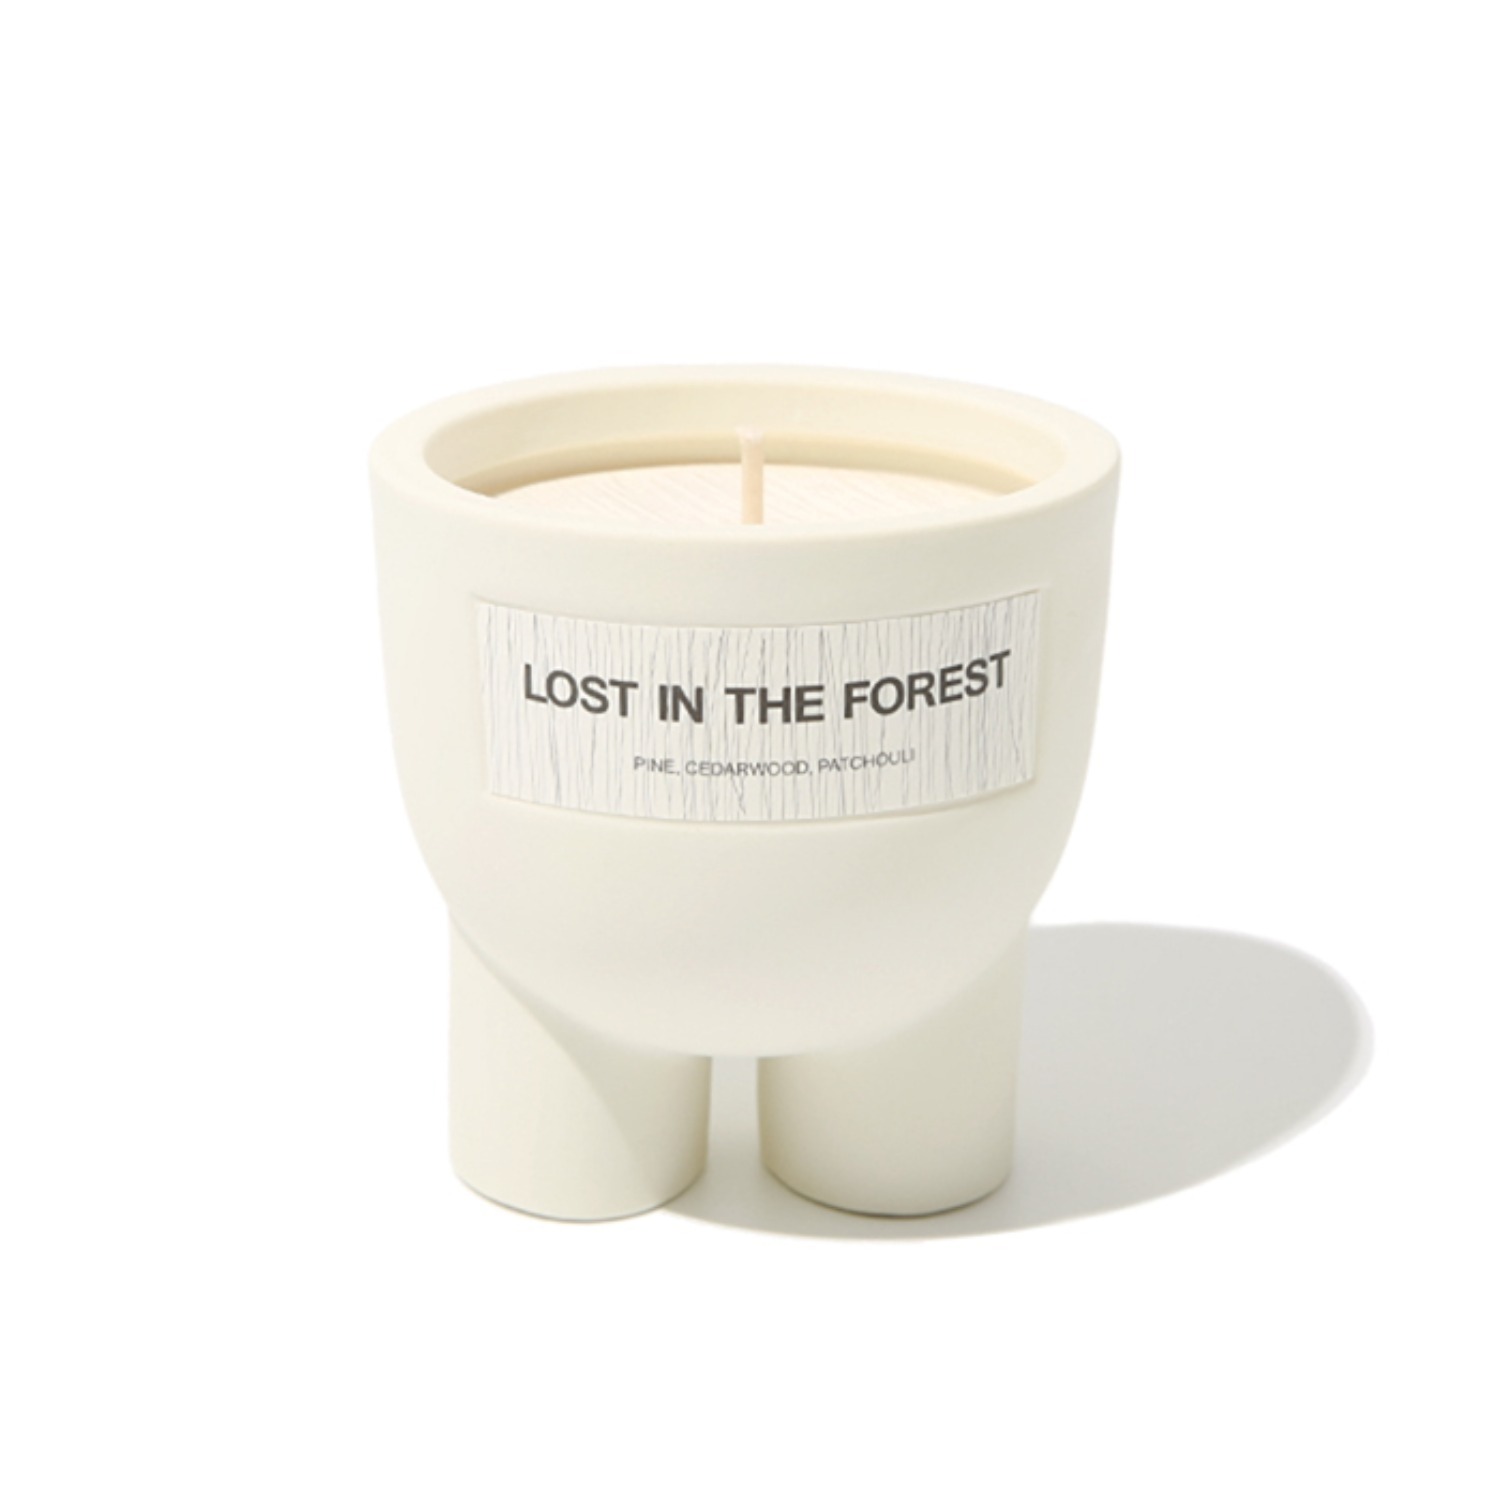 LOST IN THE FOREST scented objet candle 190g